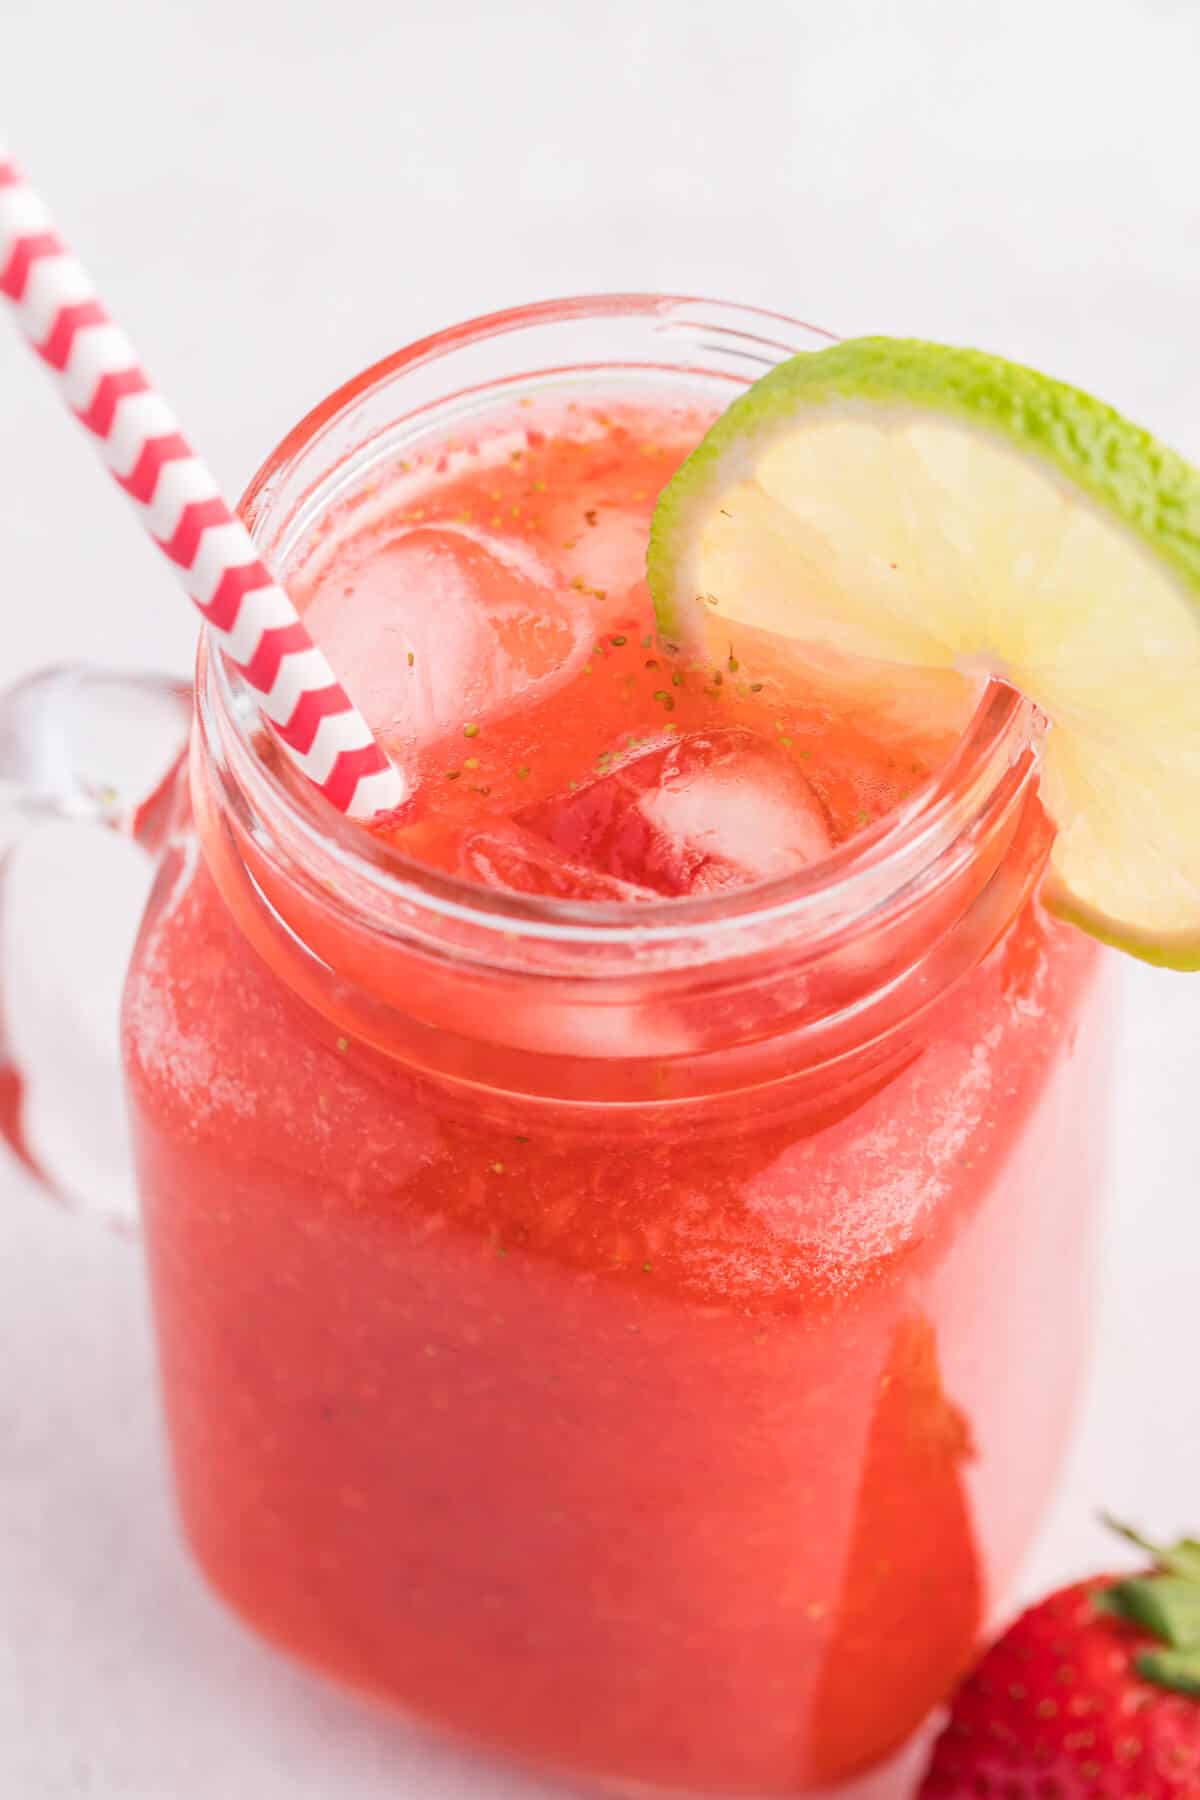 Strawberry Agua Fresca - Healthy and refreshing! Easy to make with water, lime juice and strawberries.